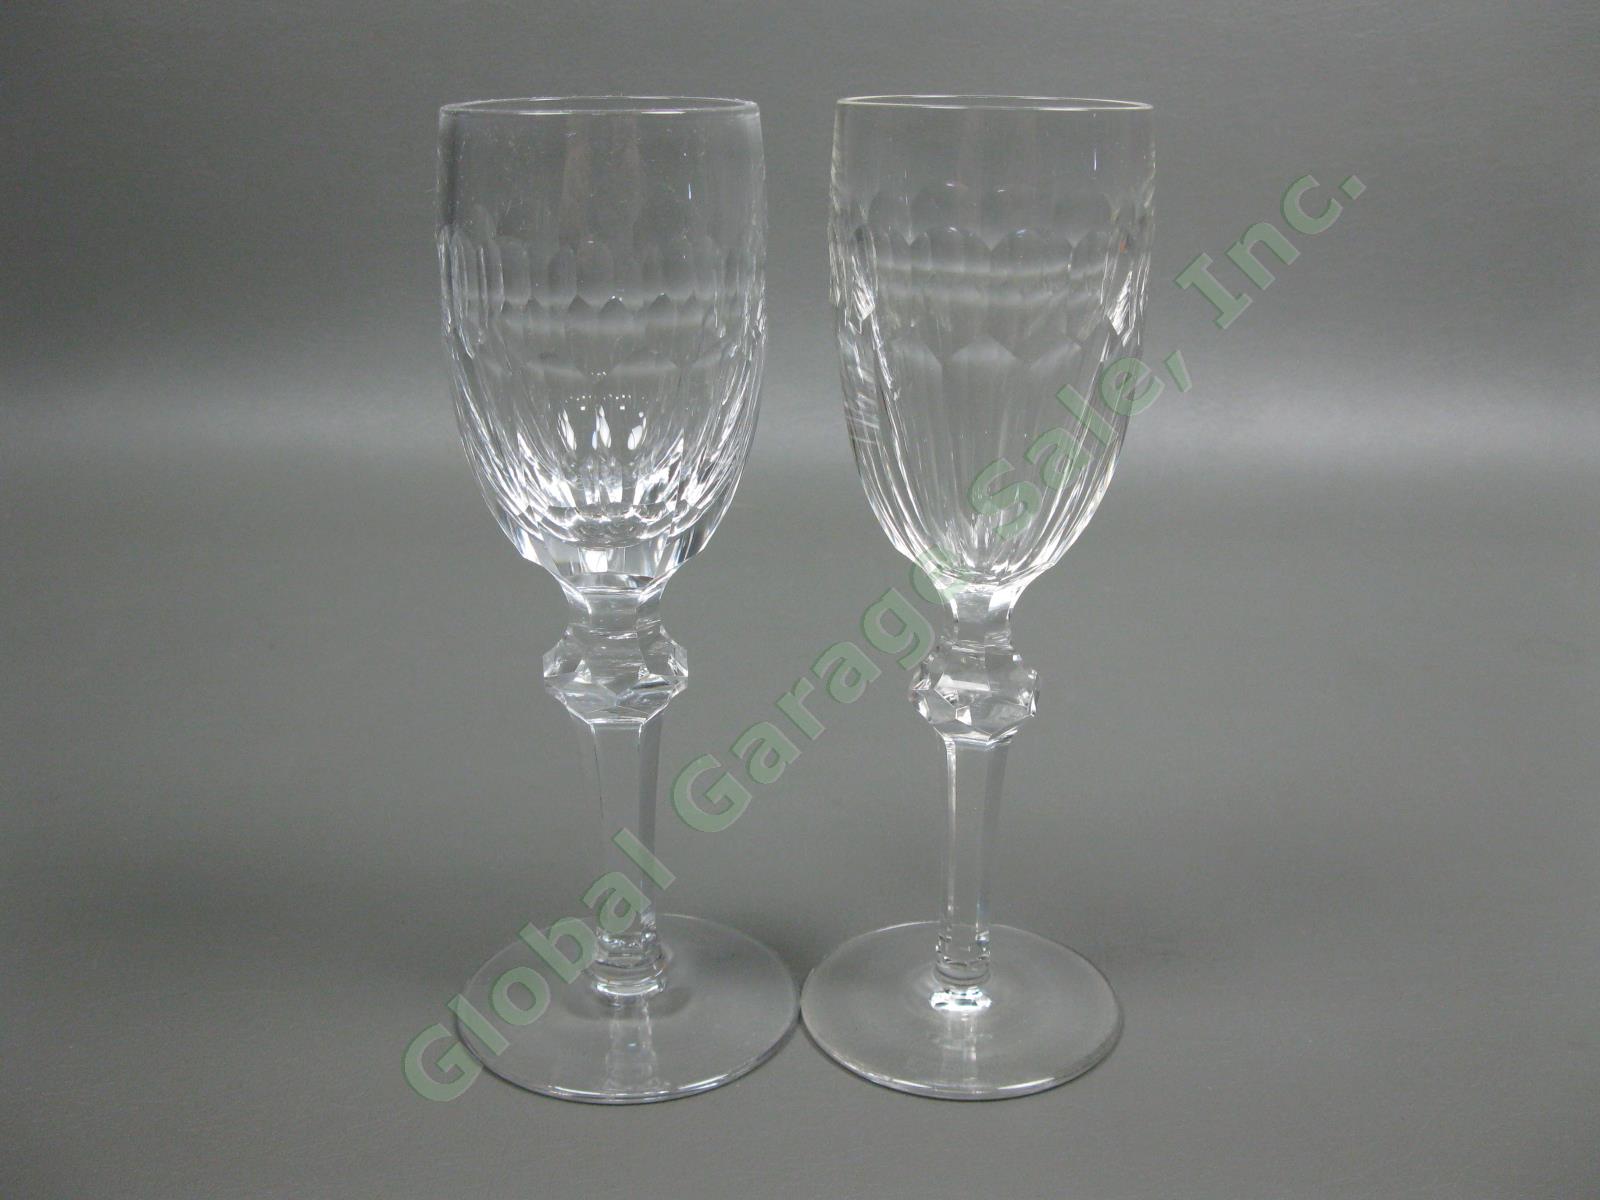 4 Waterford Crystal Curraghmore Sherry Wine Glasses Ireland Blown Cut Glass Set 6